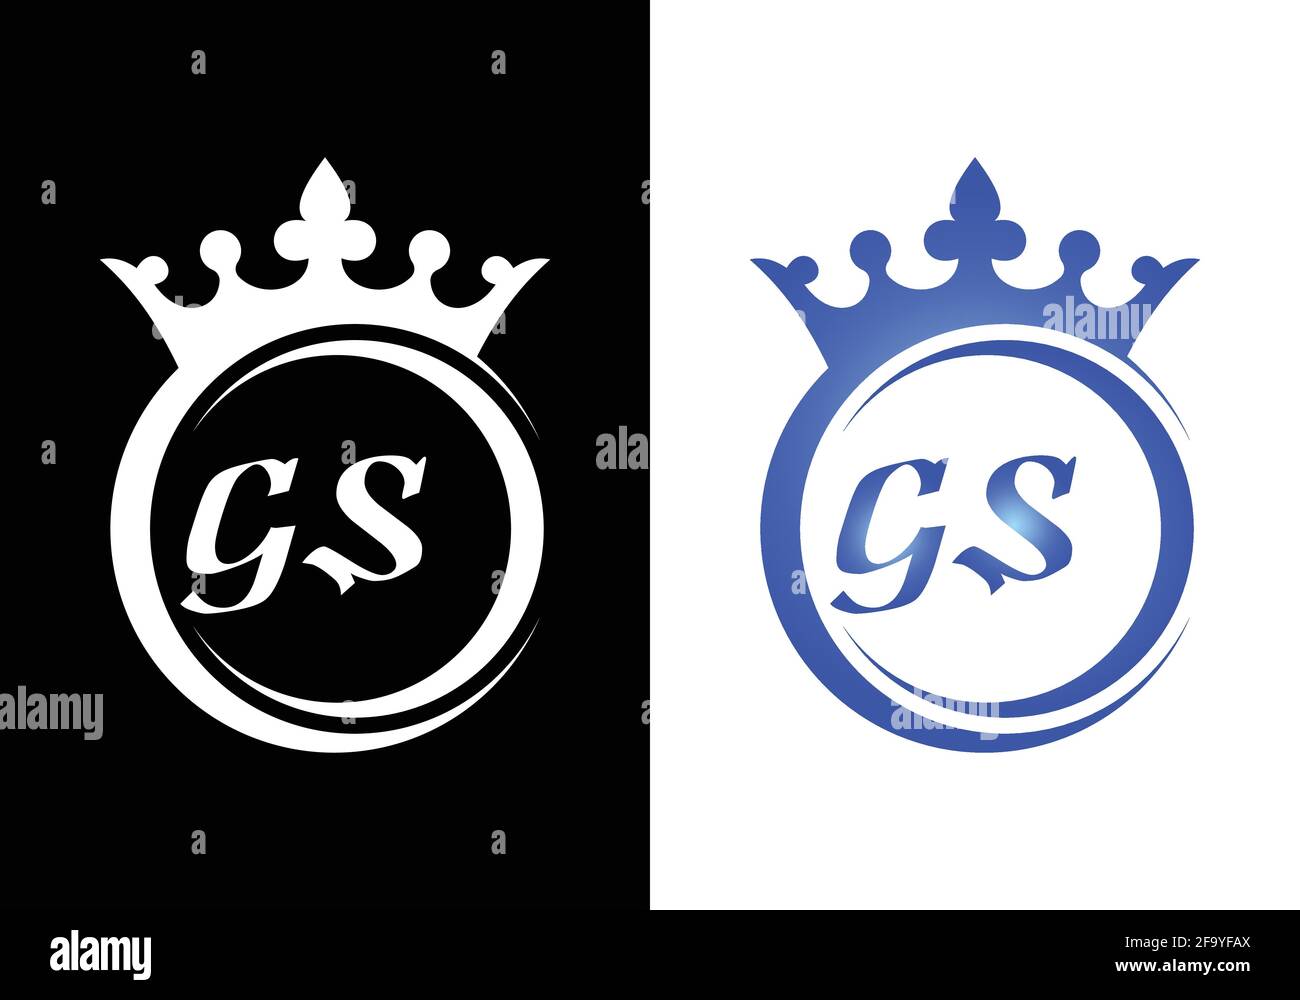 king crown letter alphabet G S for company logo icon design. Stock Vector